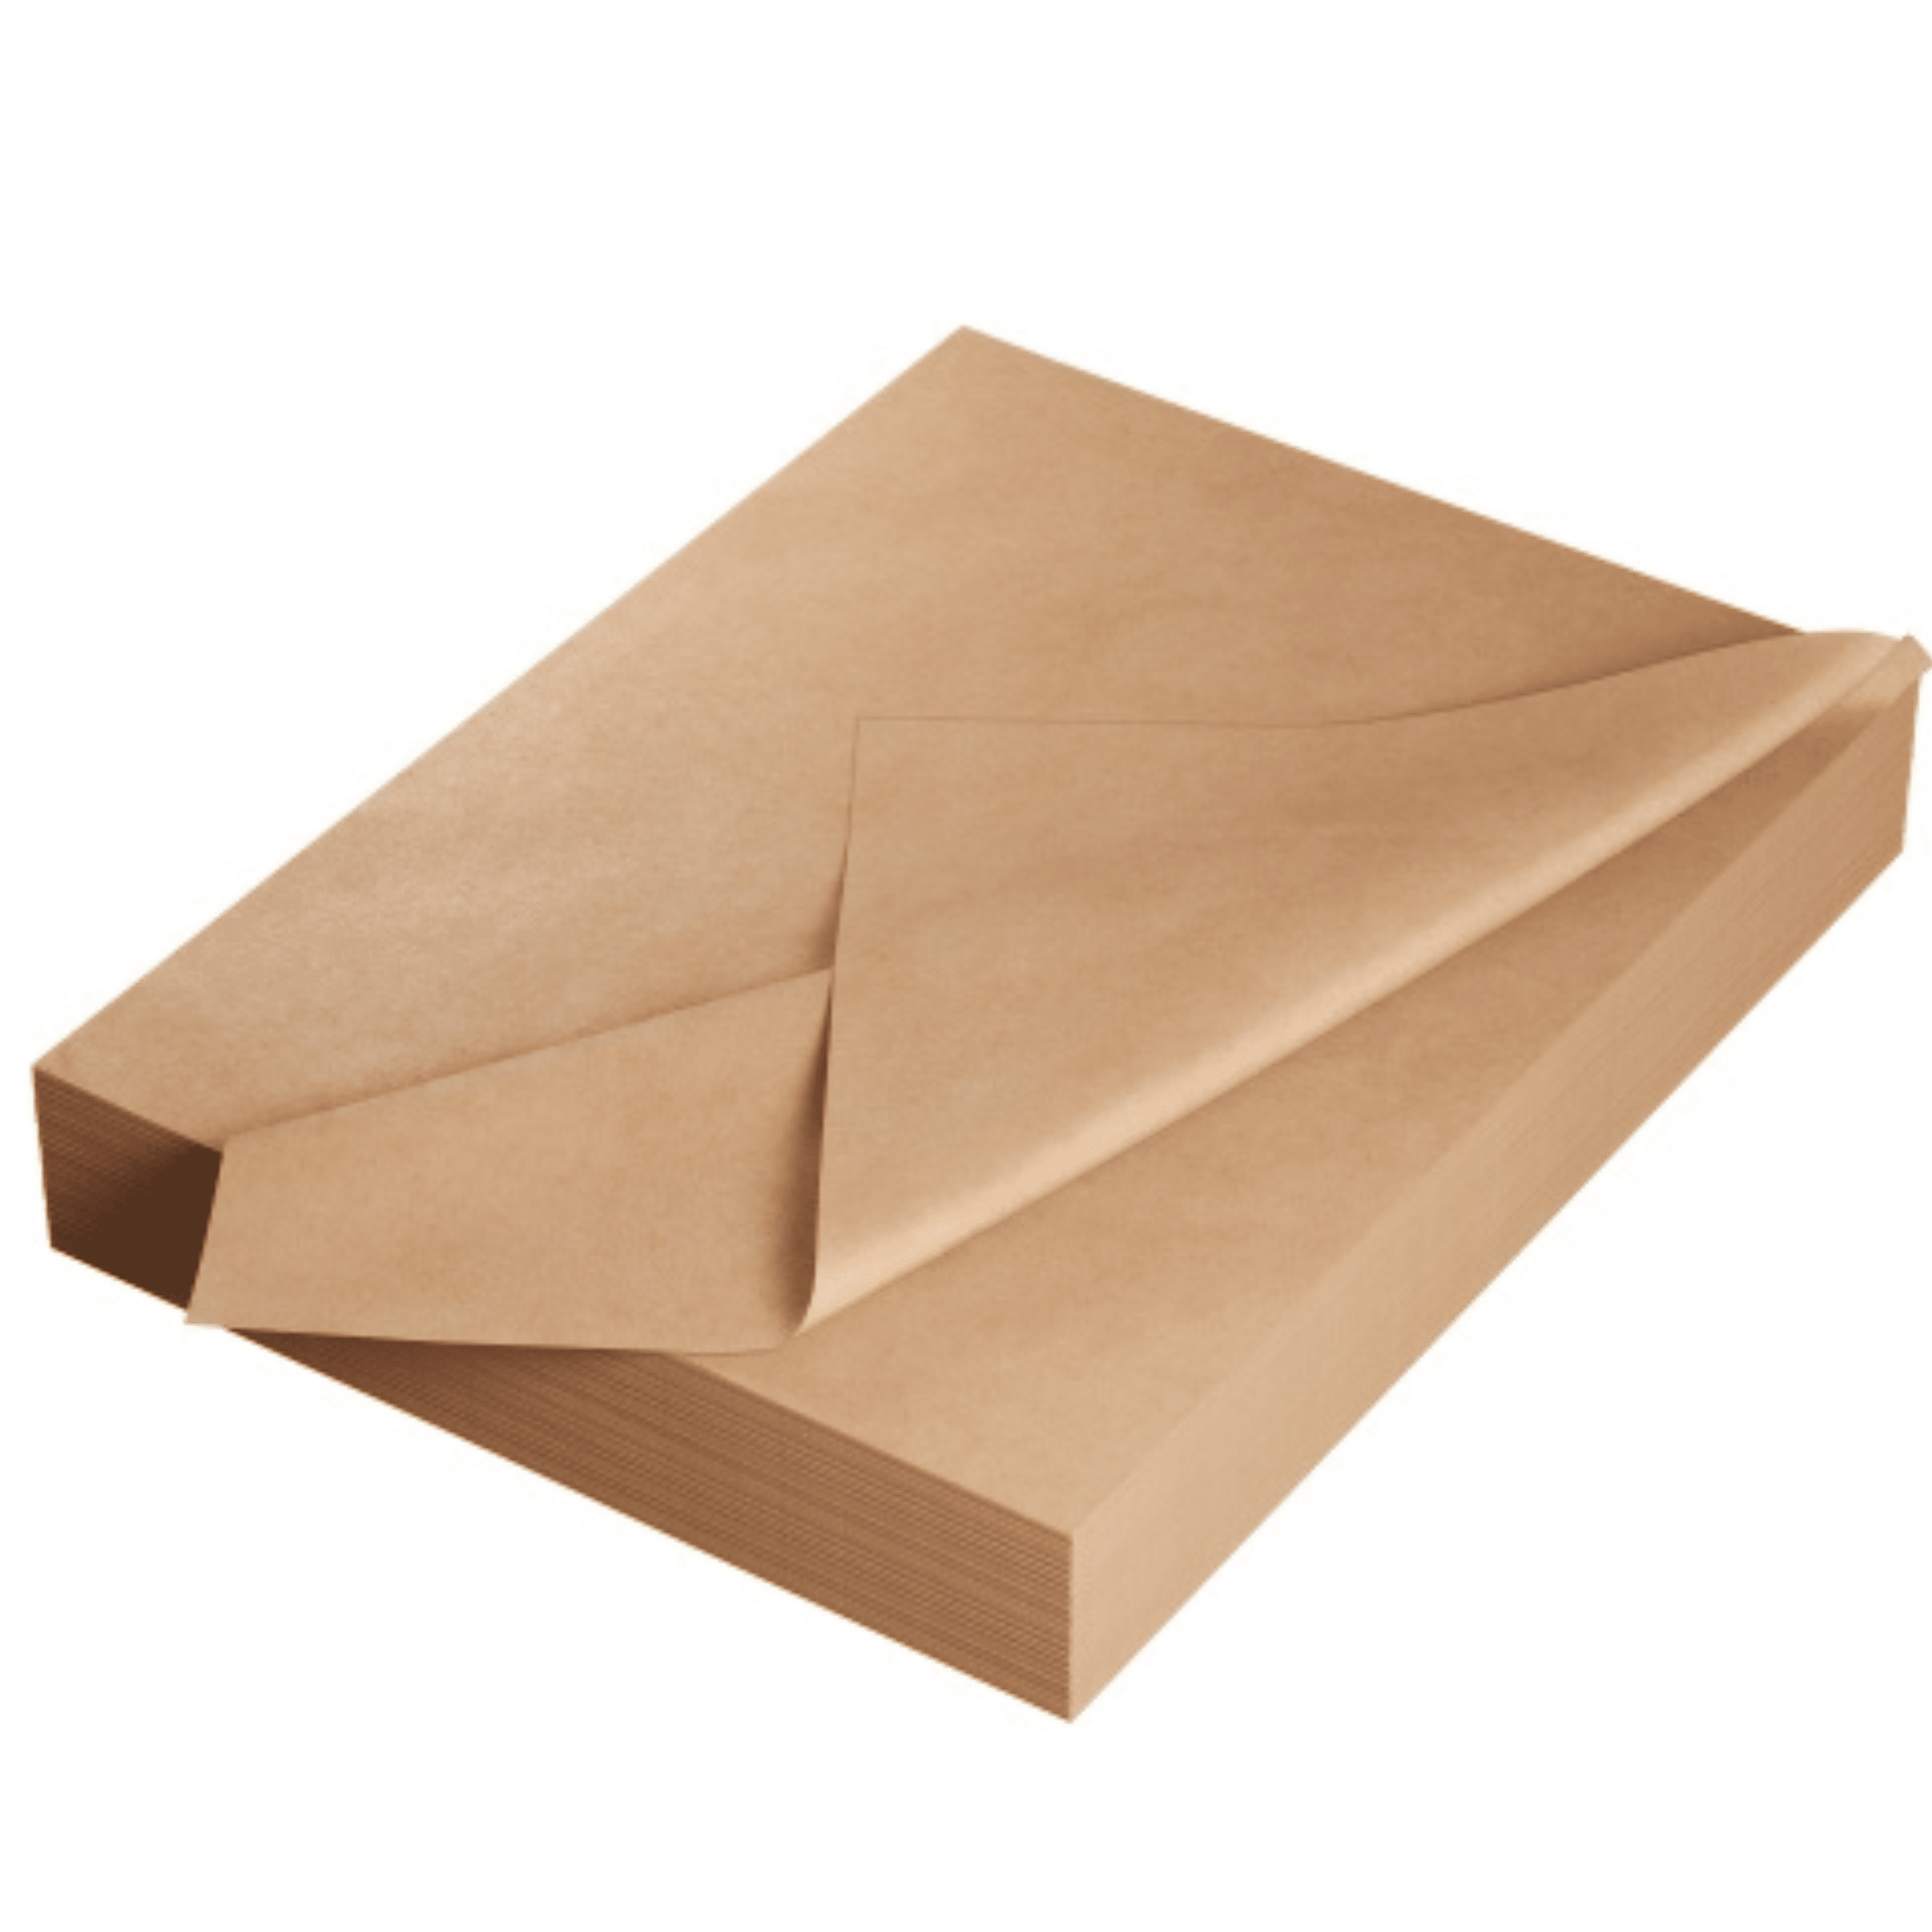 Kraft tissue paper, 15 RECYCLED tissue paper sheets 20” x 30” MADE